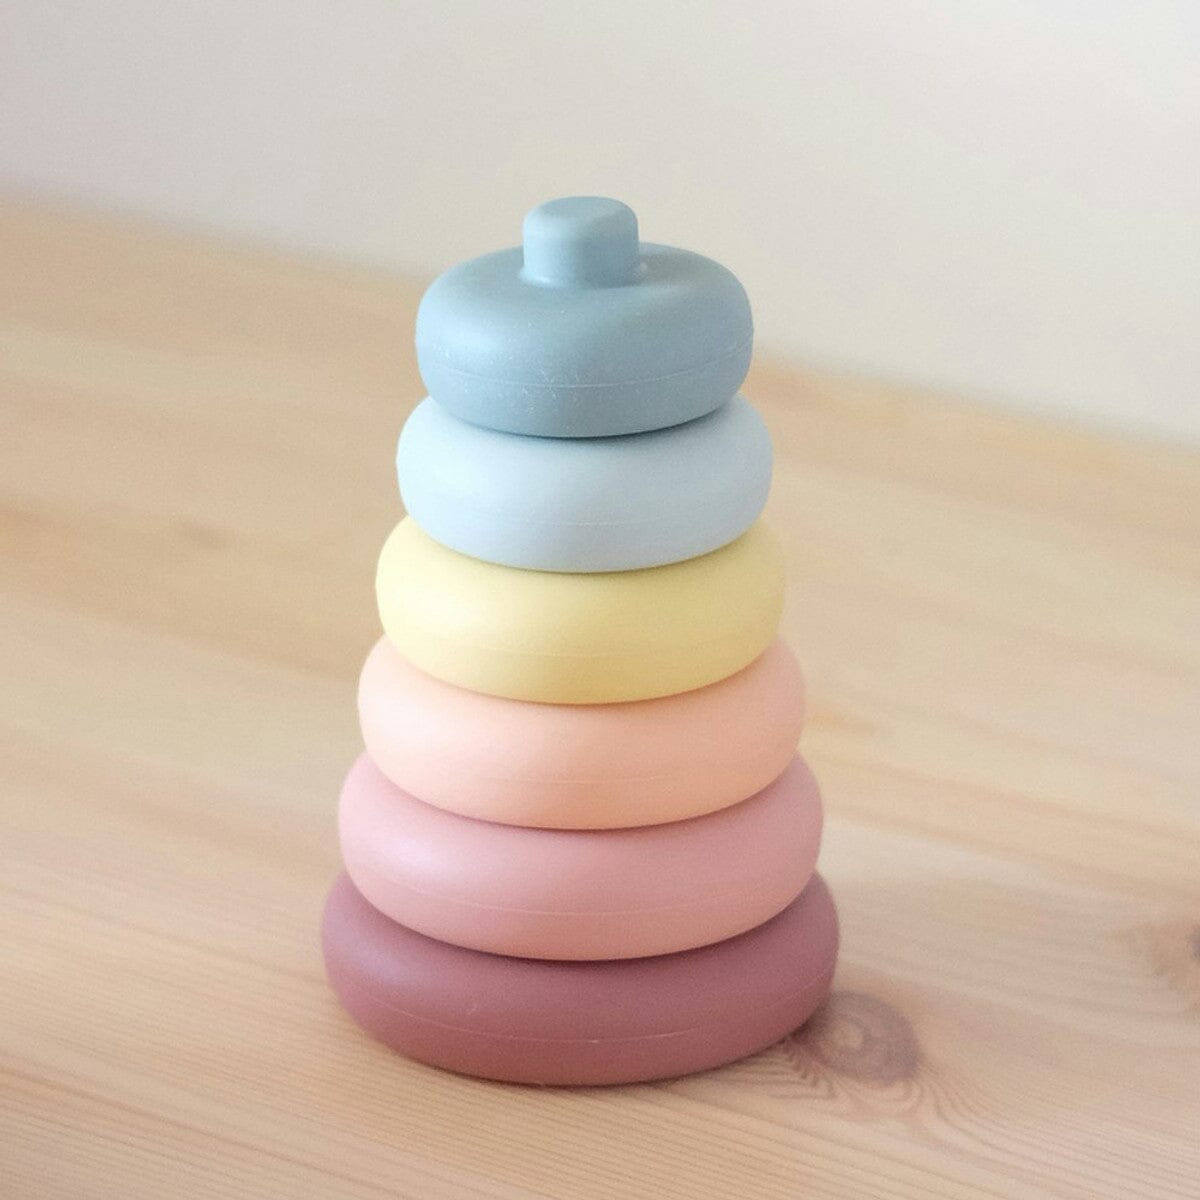 Silicone Circle Stacker - Colorful Educational Toy for Babies and Toddlers Sorting & Stacking Toys Storkke 